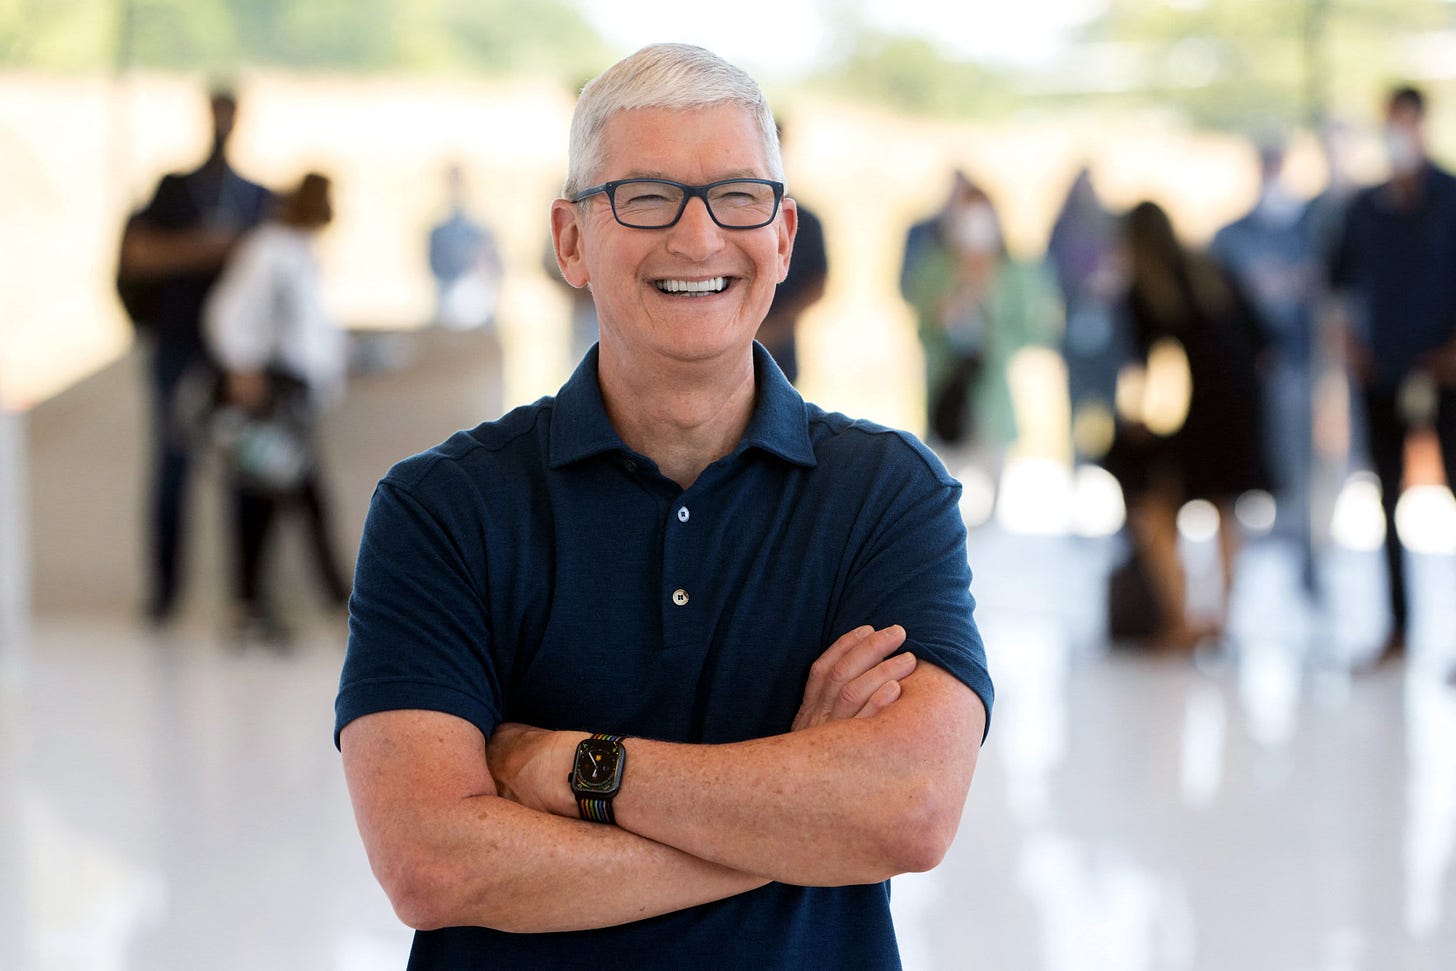 Apple CEO Tim Cook explains why people want a mixed reality headset